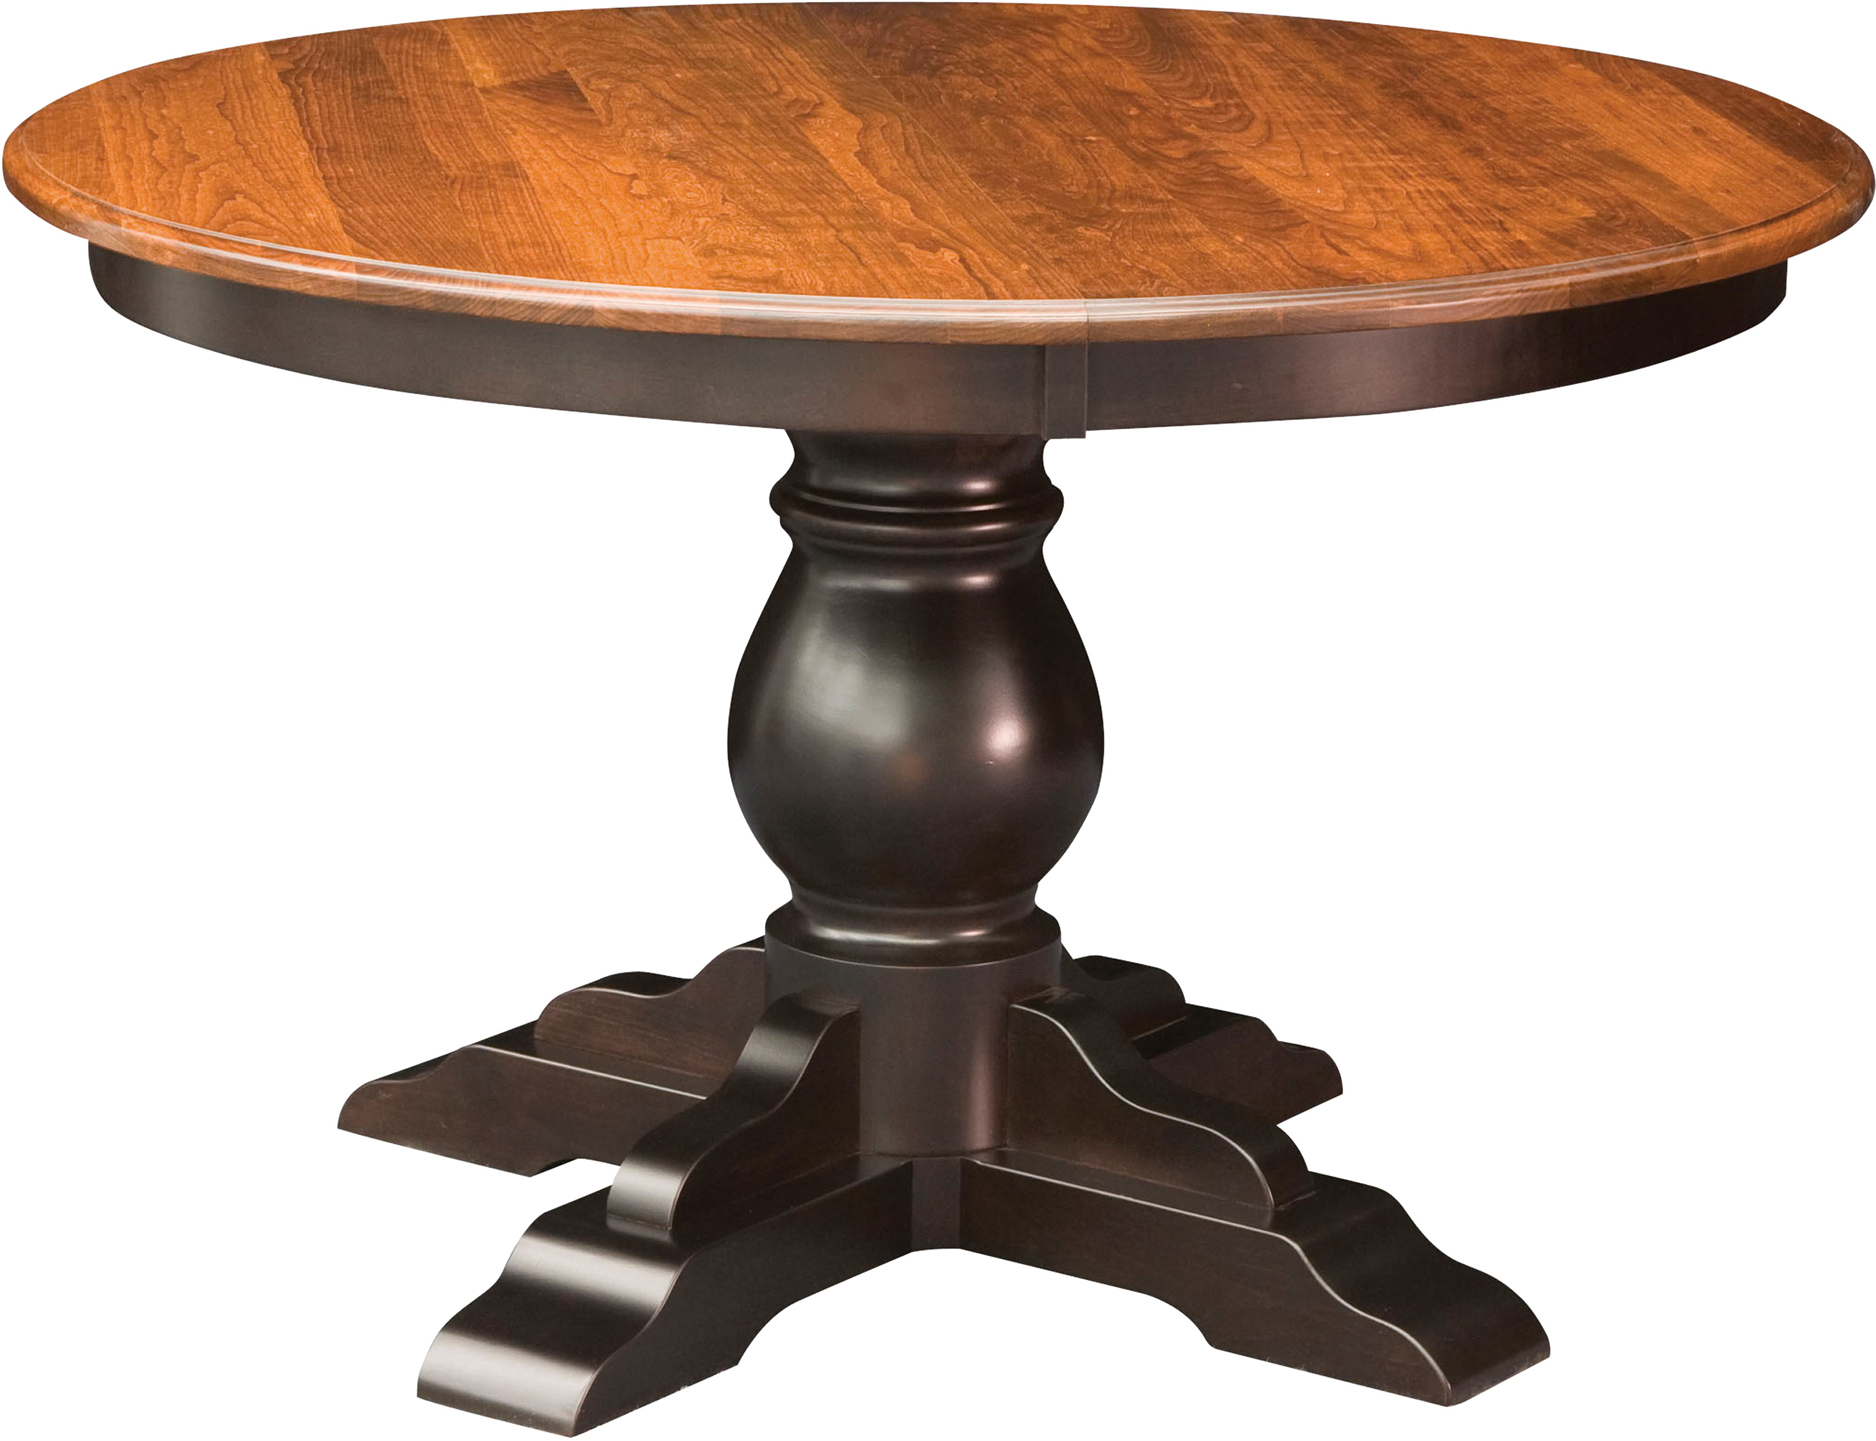 48 Round Pedestal Dining Room Table